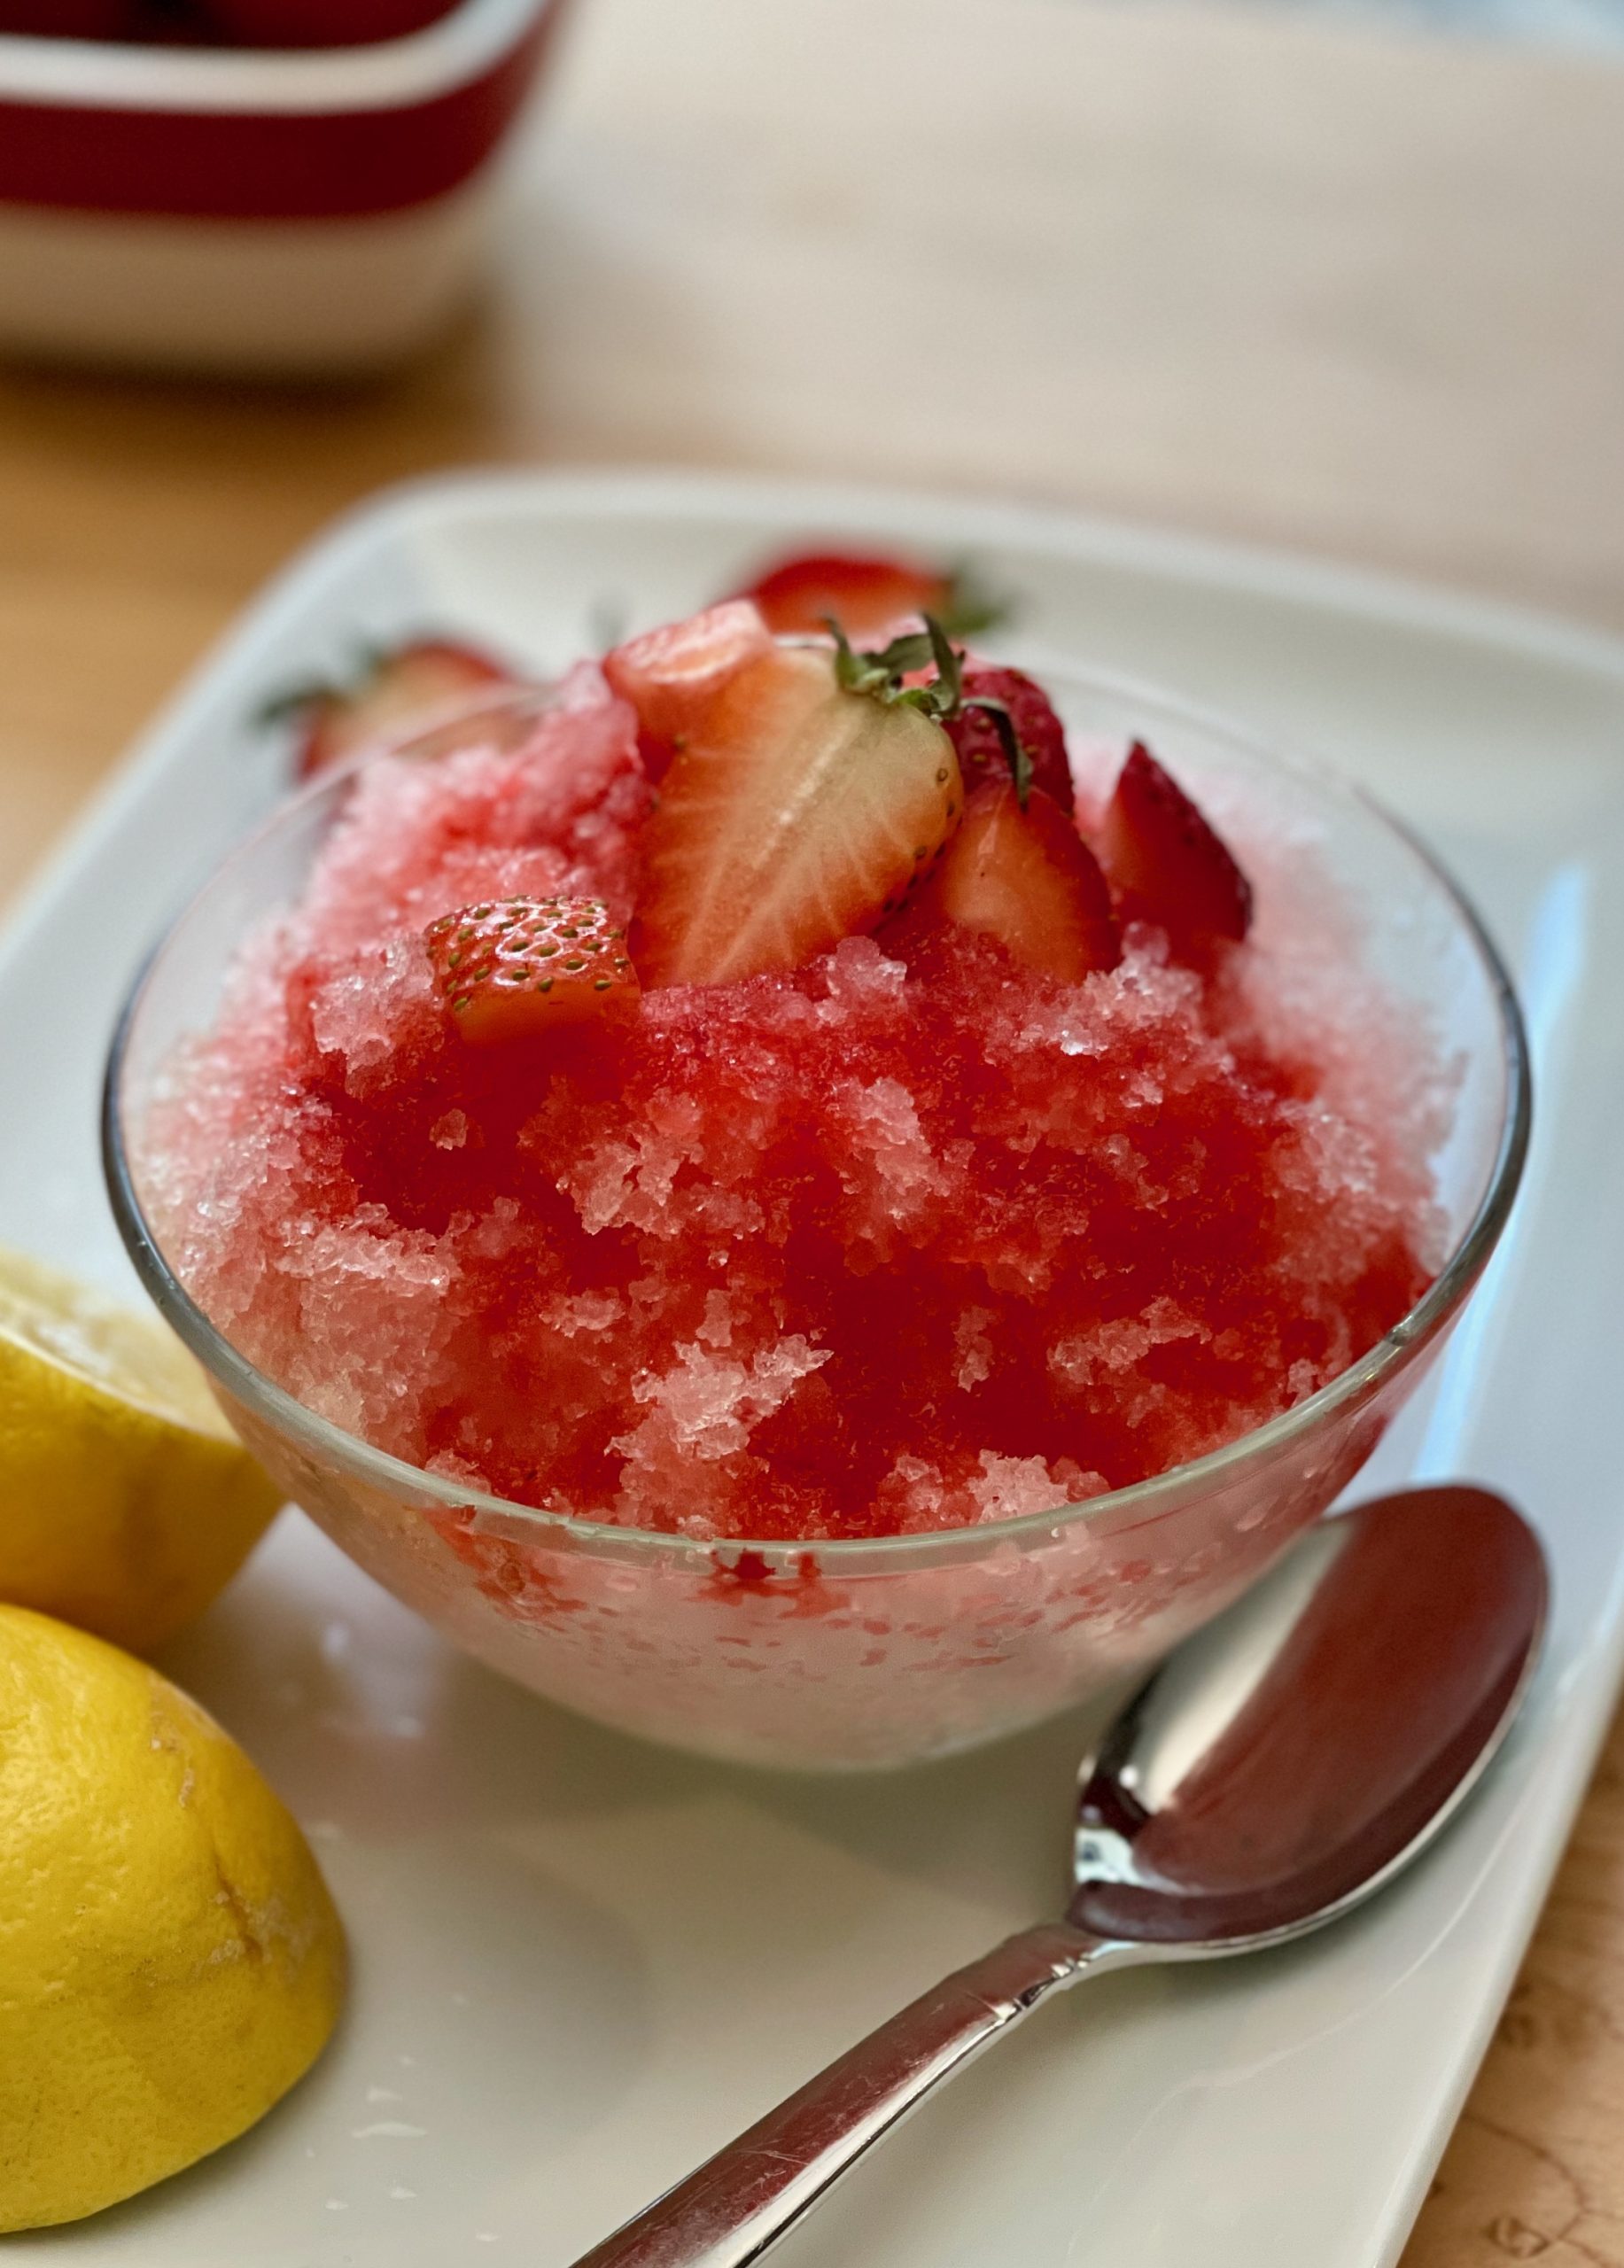 https://www.epicuricloud.com/wp-content/uploads/2022/05/Shave-Ice-Strawberry-Lemonade-w-Syrup-scaled.jpeg